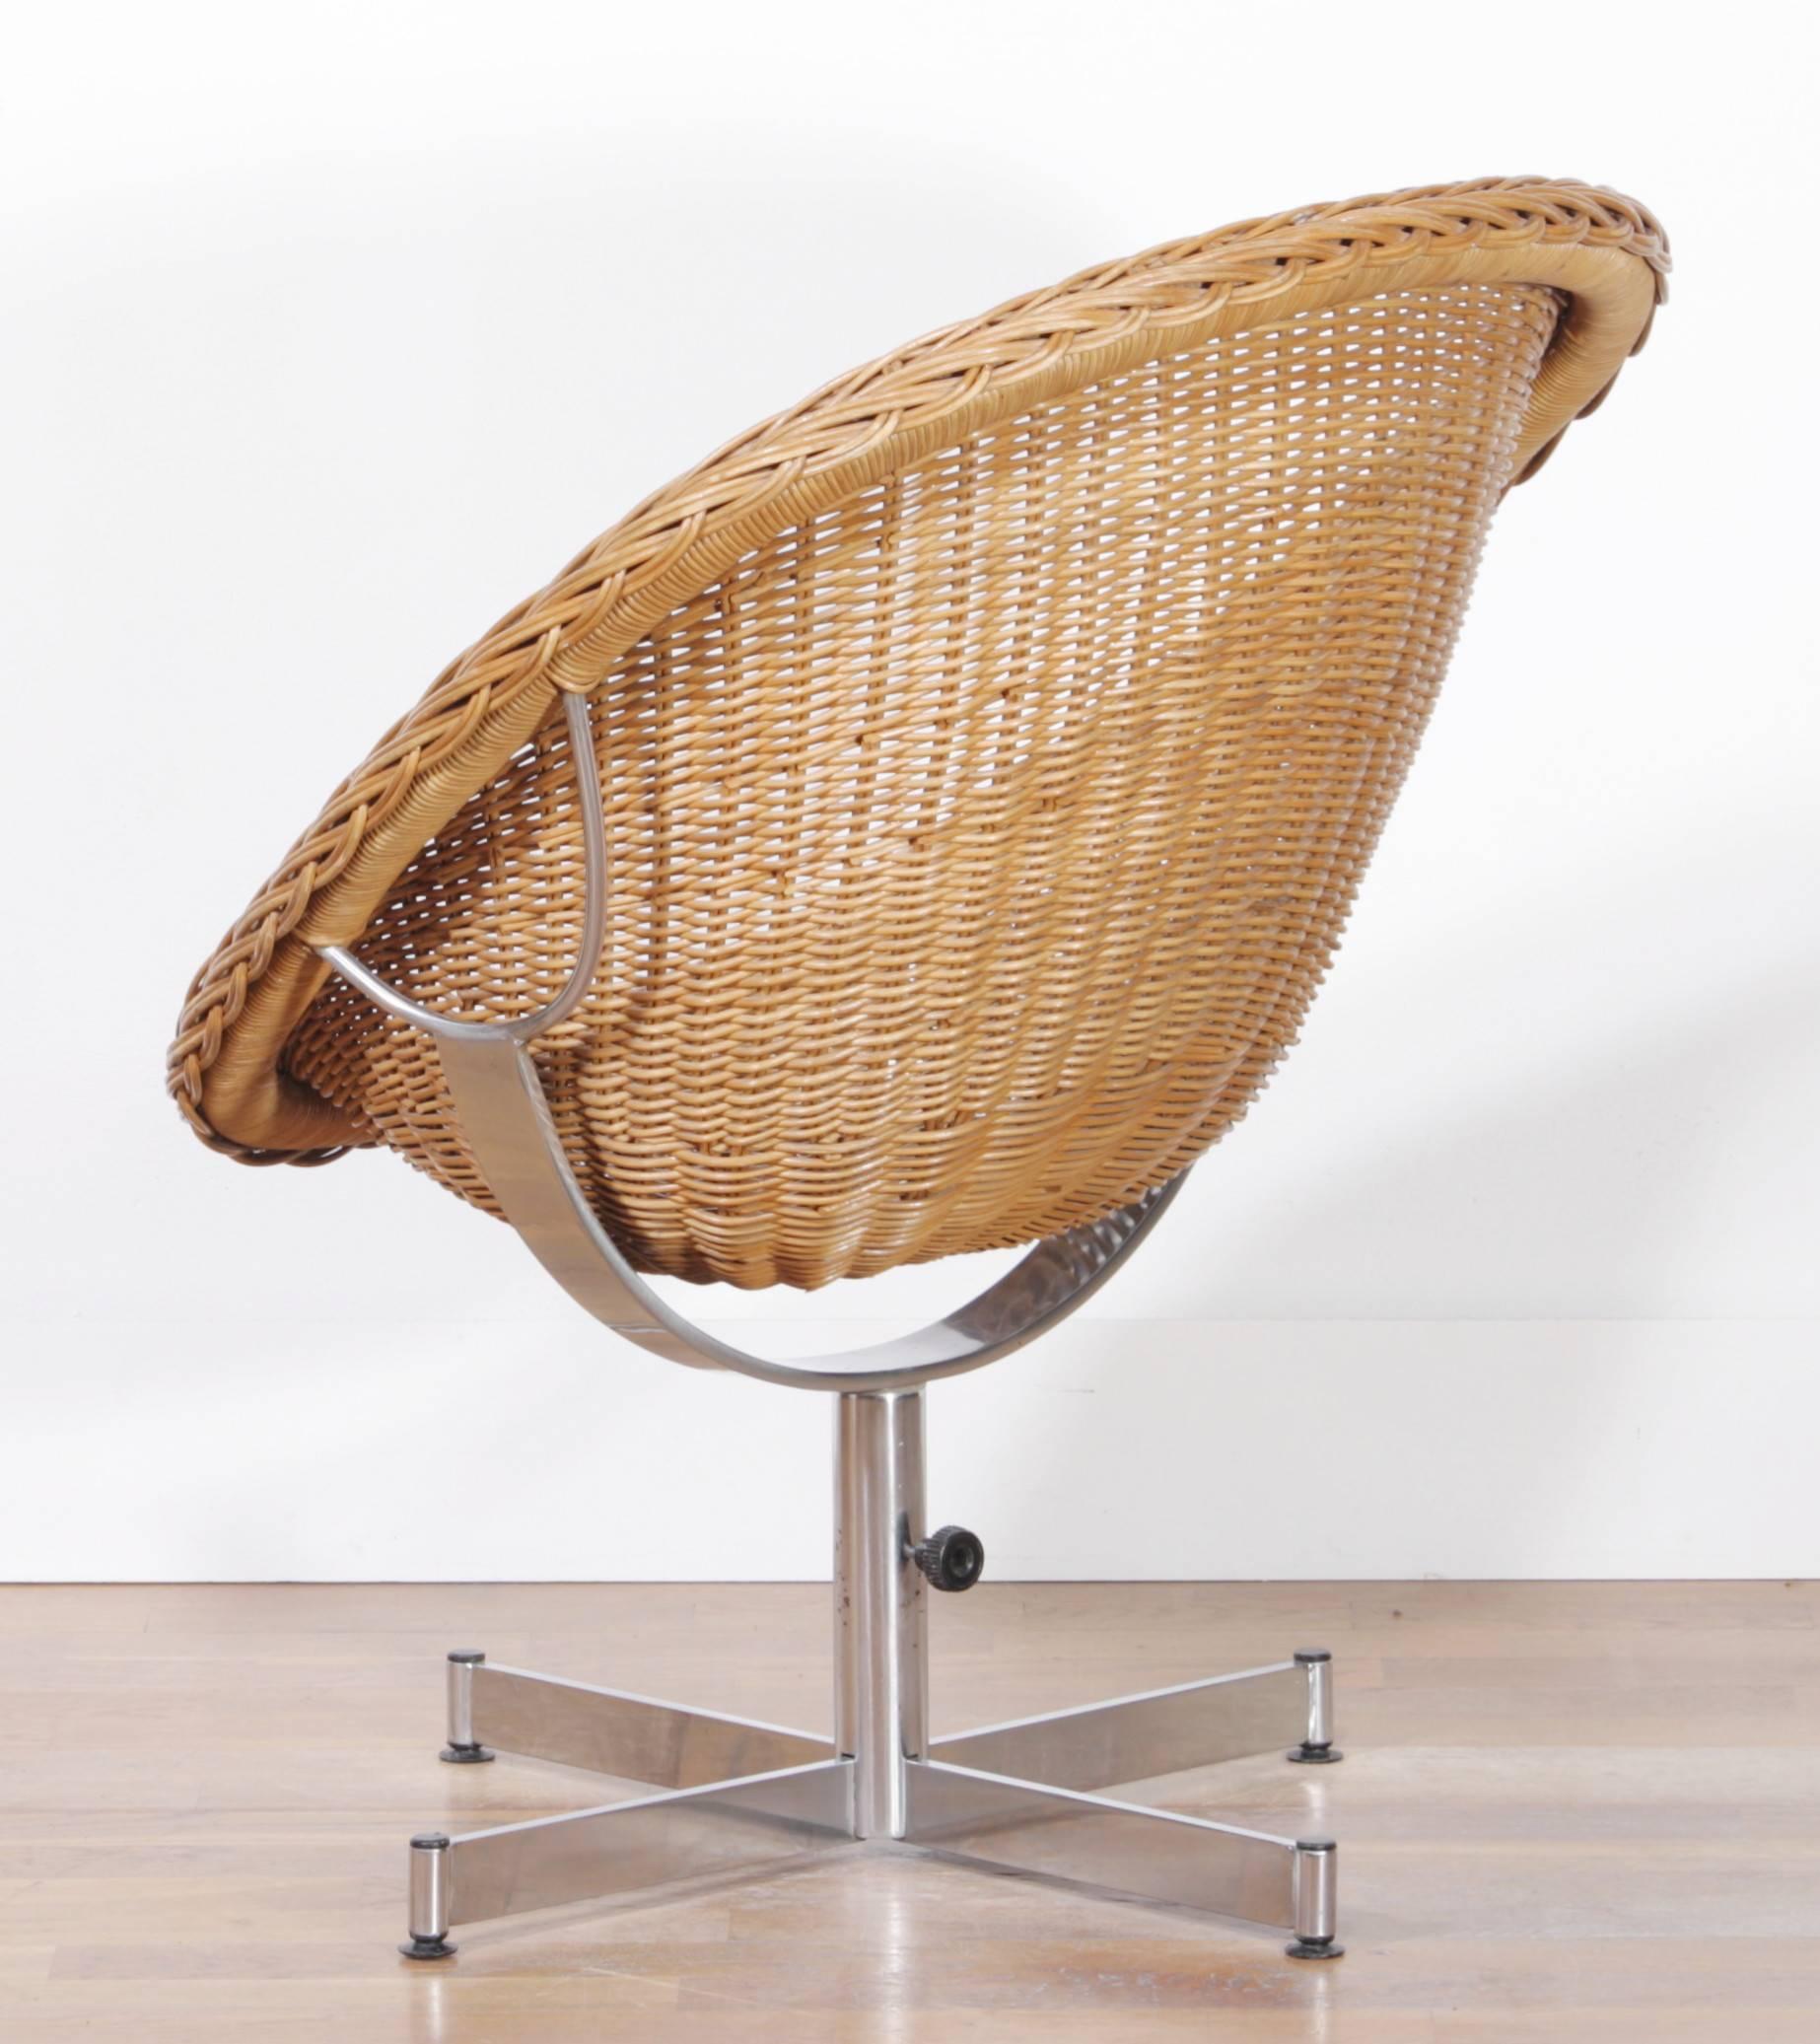 Beautiful and excellent chair in absolute perfect condition.

This is a very rare piece.

The chair is designed by Dirk Van Sliedrecht.

All the stainless and also the rattan are perfect.

Made by Rohé.

Period 1950–1959.